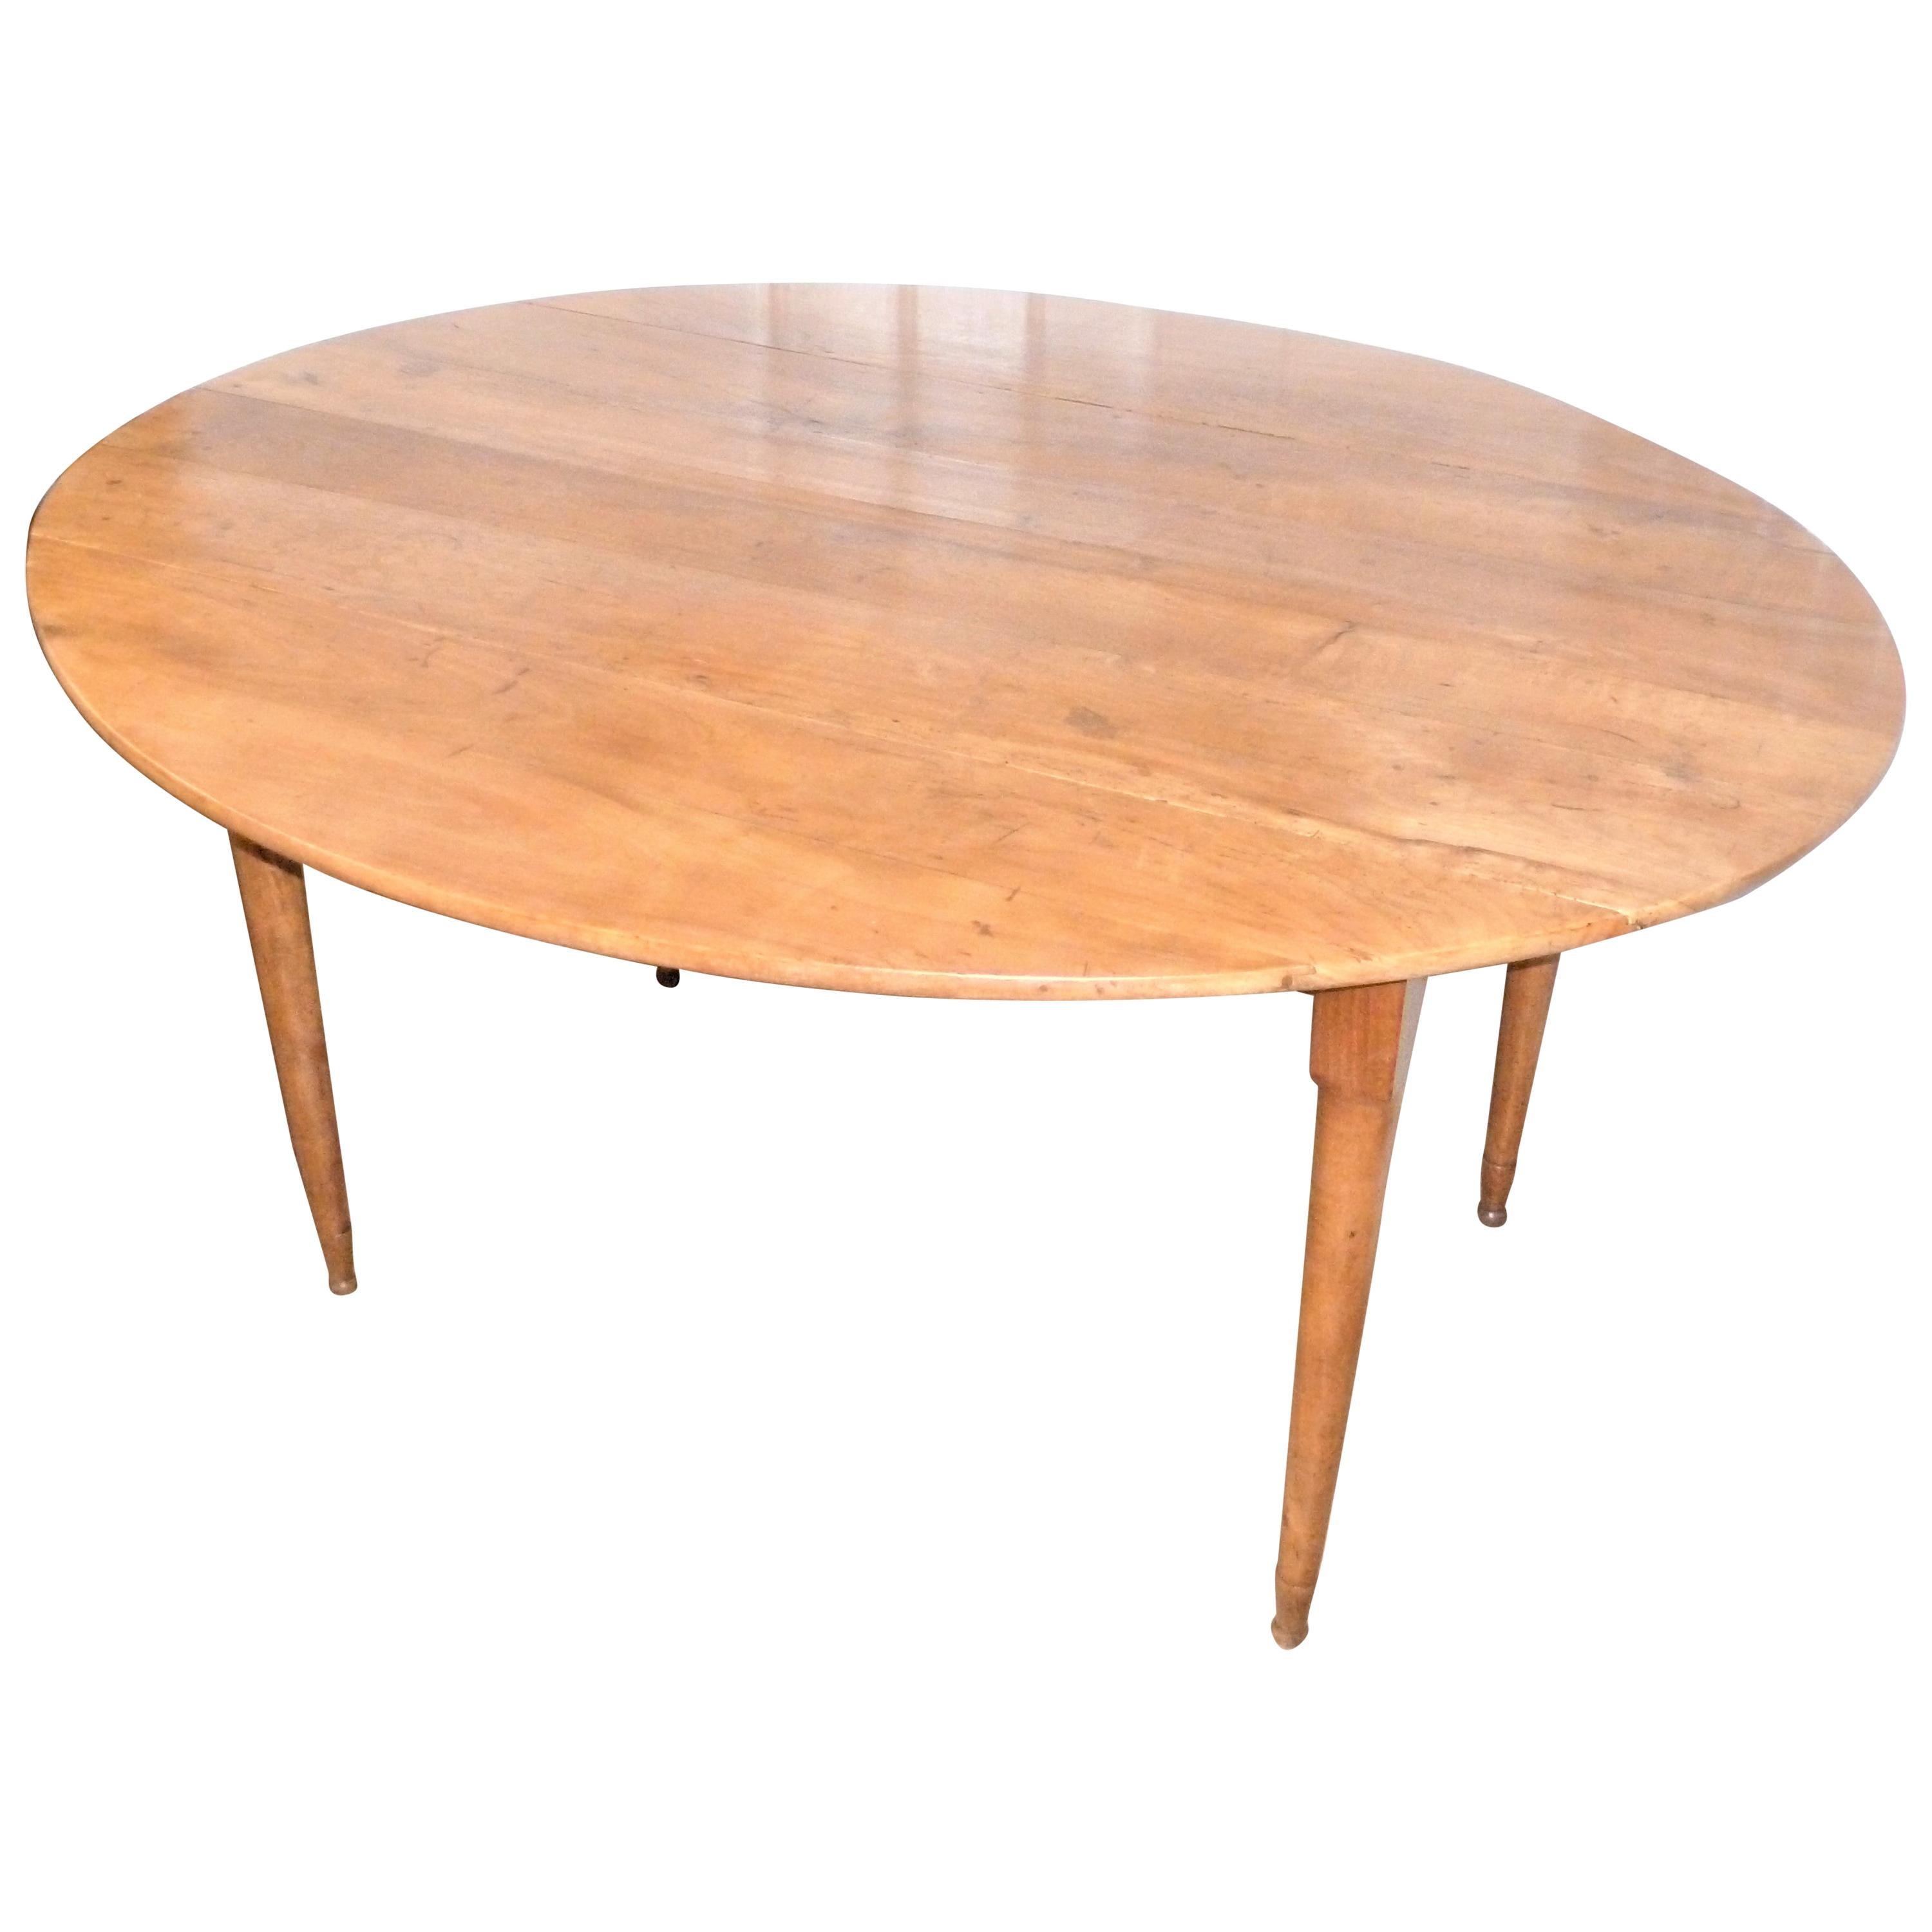 Antique 18th Century French Oval Drop-Leaf Cherry Dining Table on Louis XVI Legs For Sale